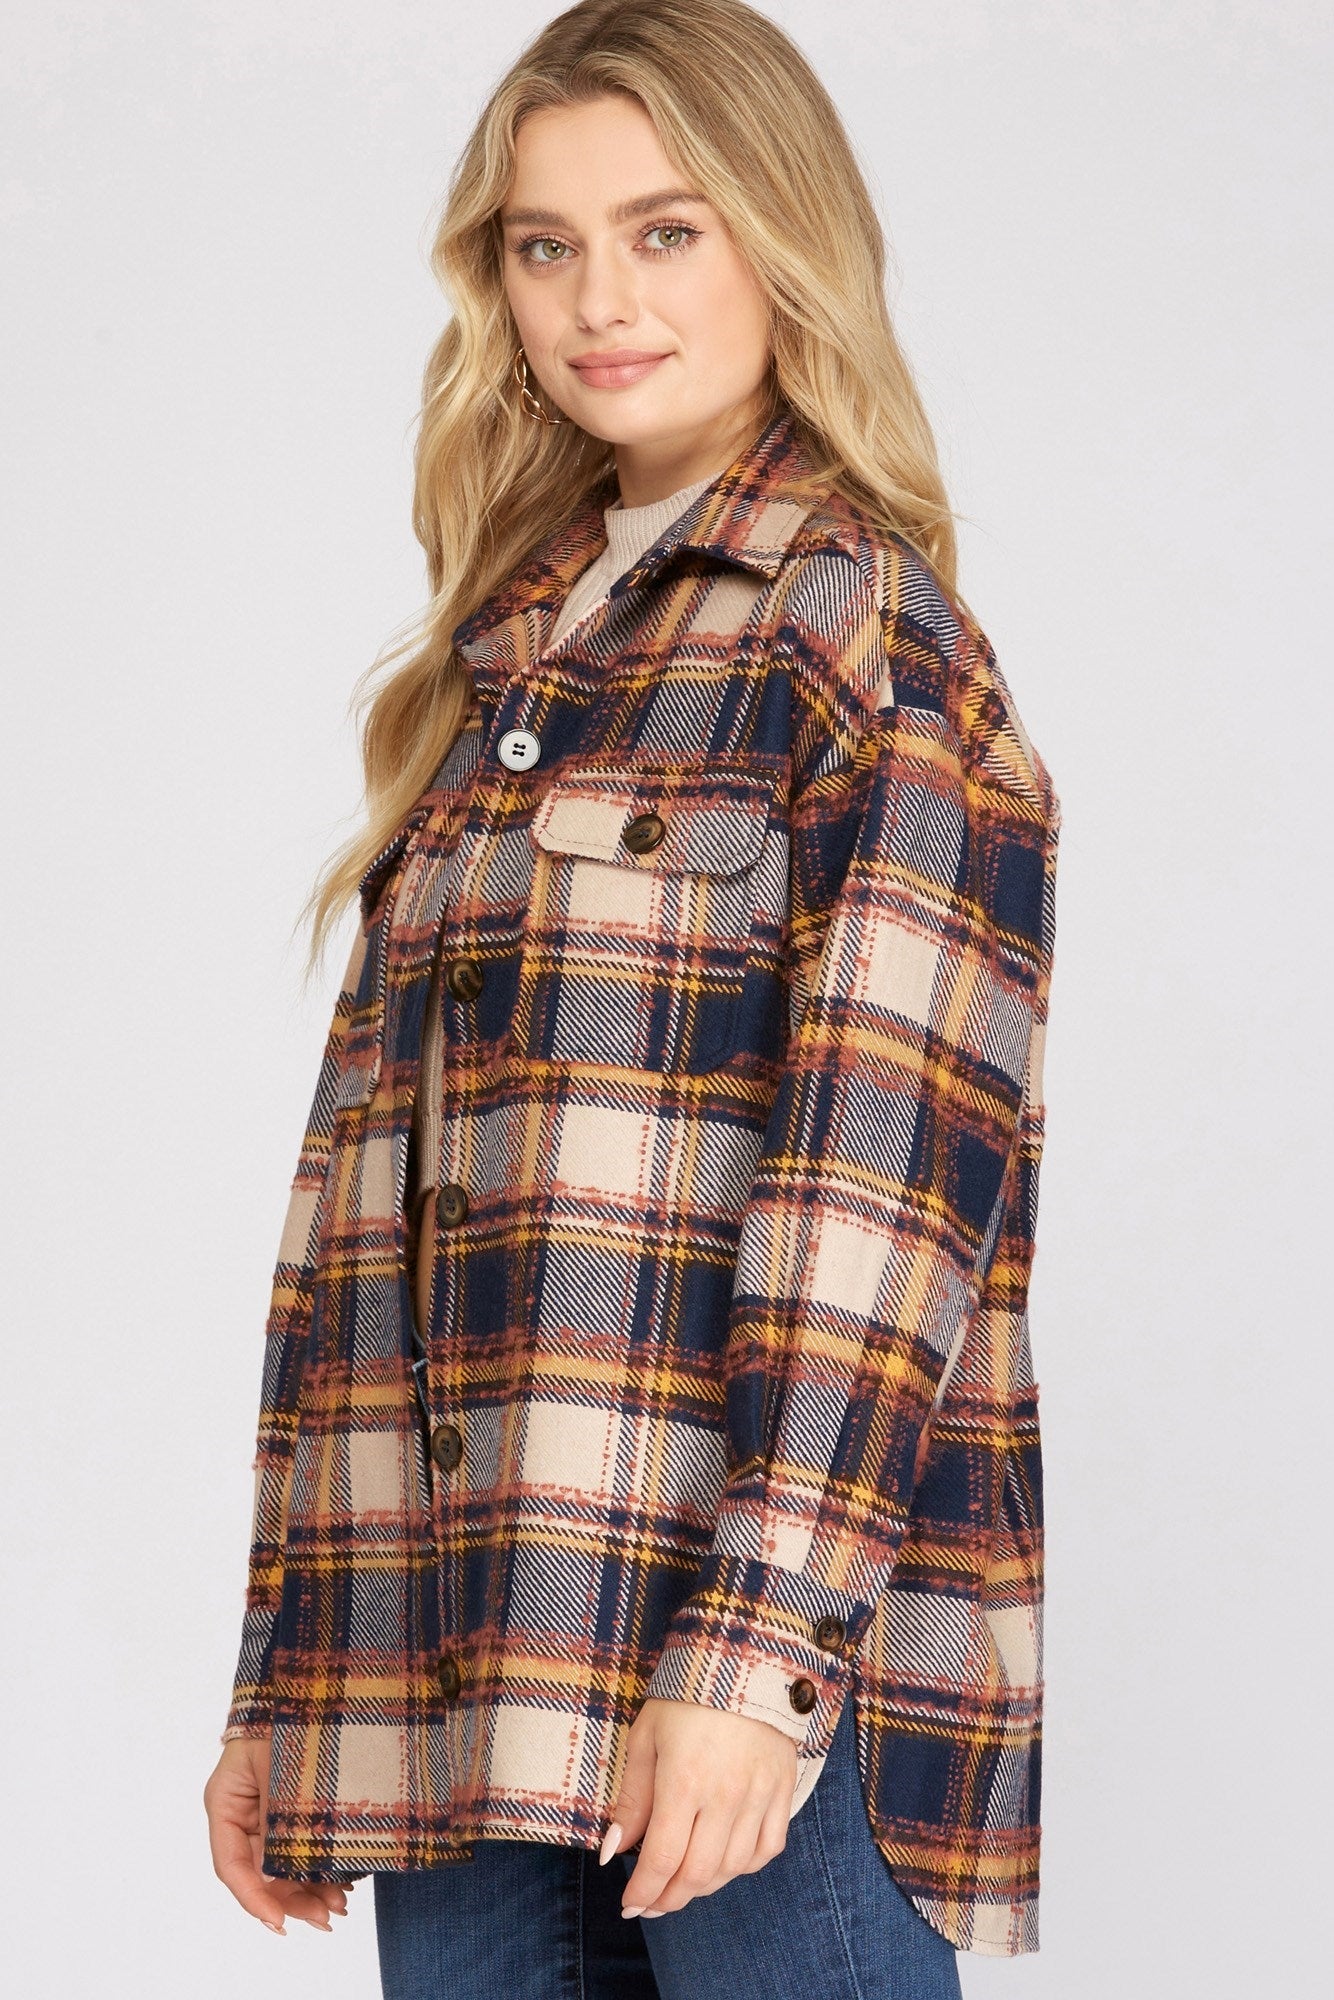 Woven Plaid Shacket - Navy-Shacket- Hometown Style HTS, women's in store and online boutique located in Ingersoll, Ontario